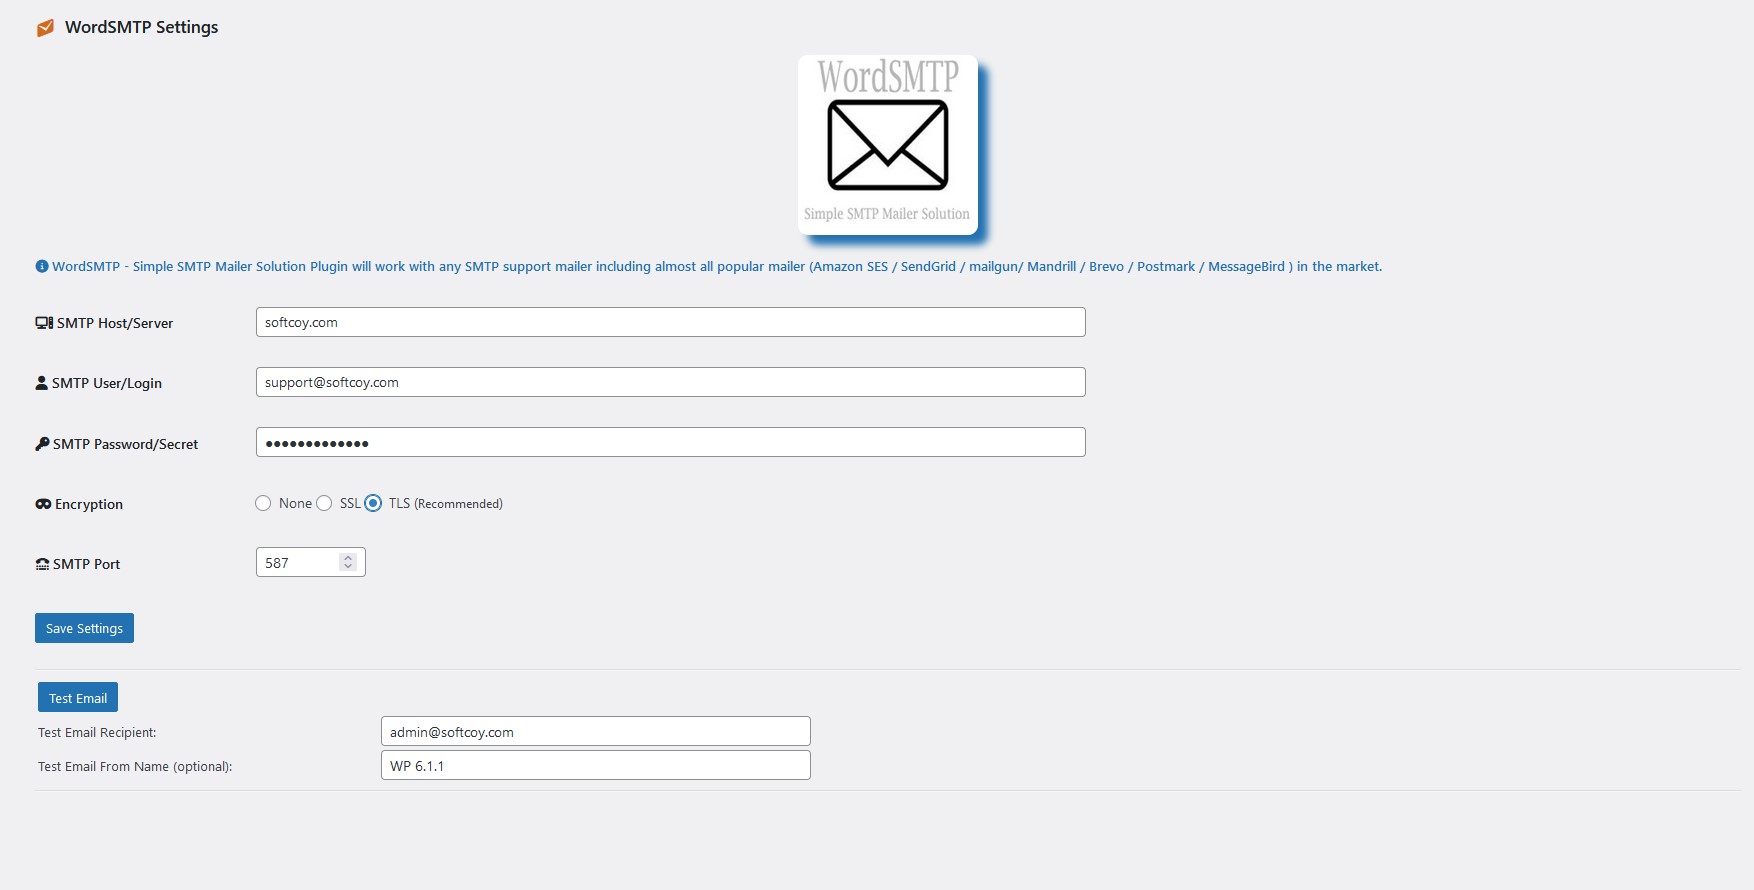 Complete the WordSMTP setting options to make it work with your WordPress or WooCommerce in image screenshot-2.jpg.